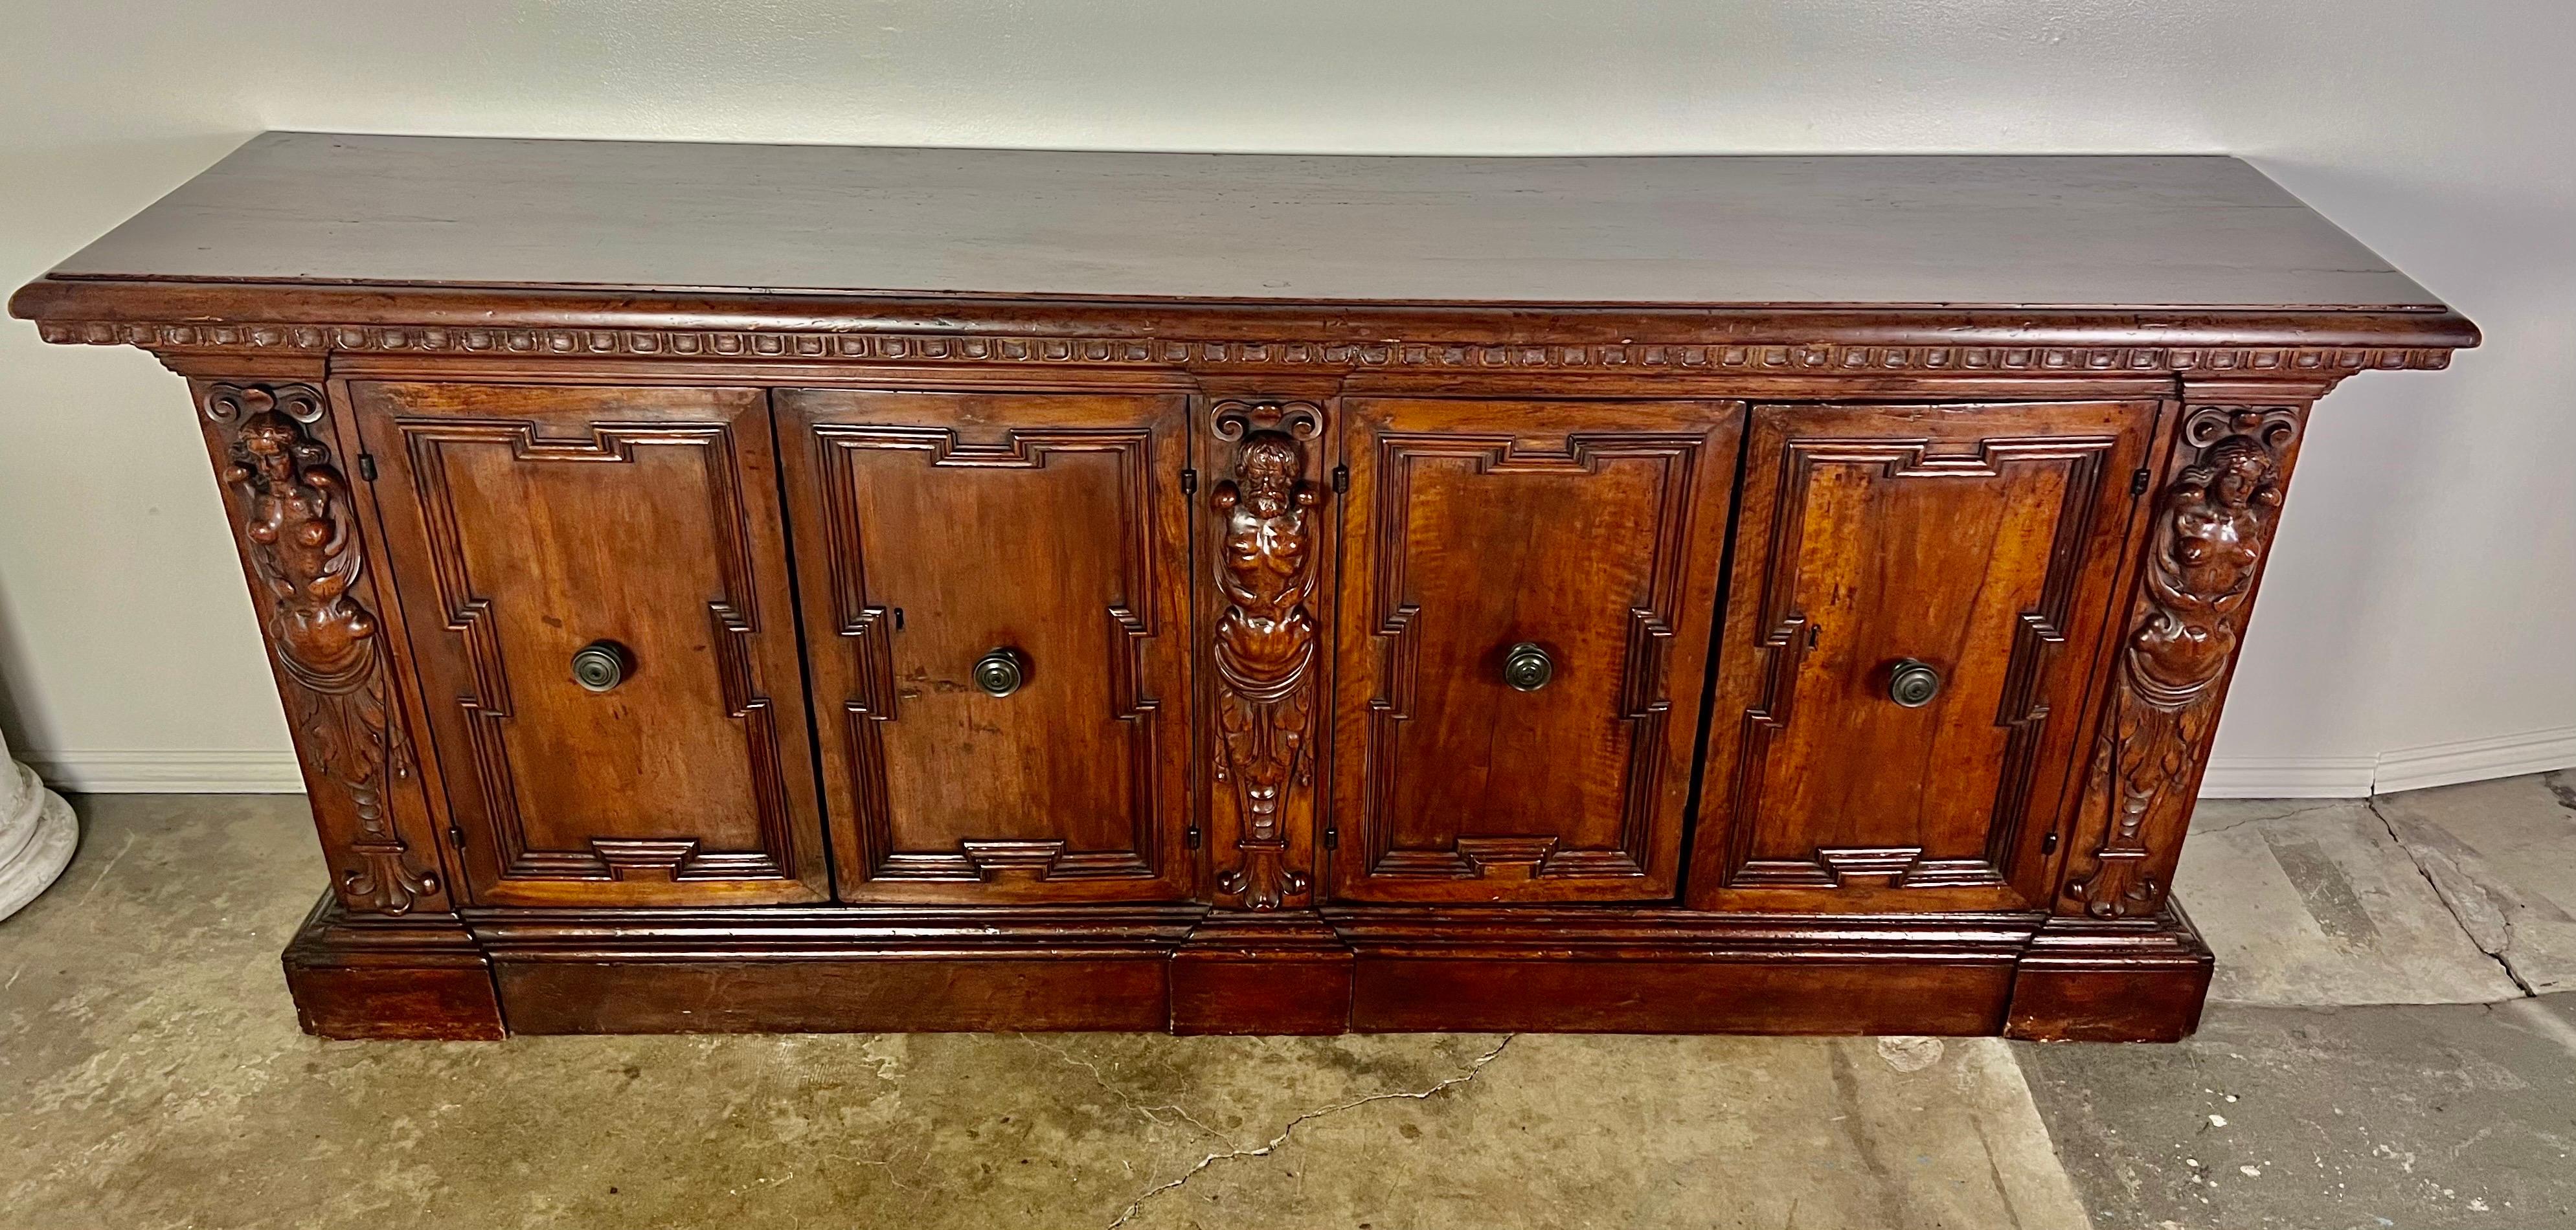 Renaissance 19th Century Walnut Italian Credenza with Intricate Carving Throughout